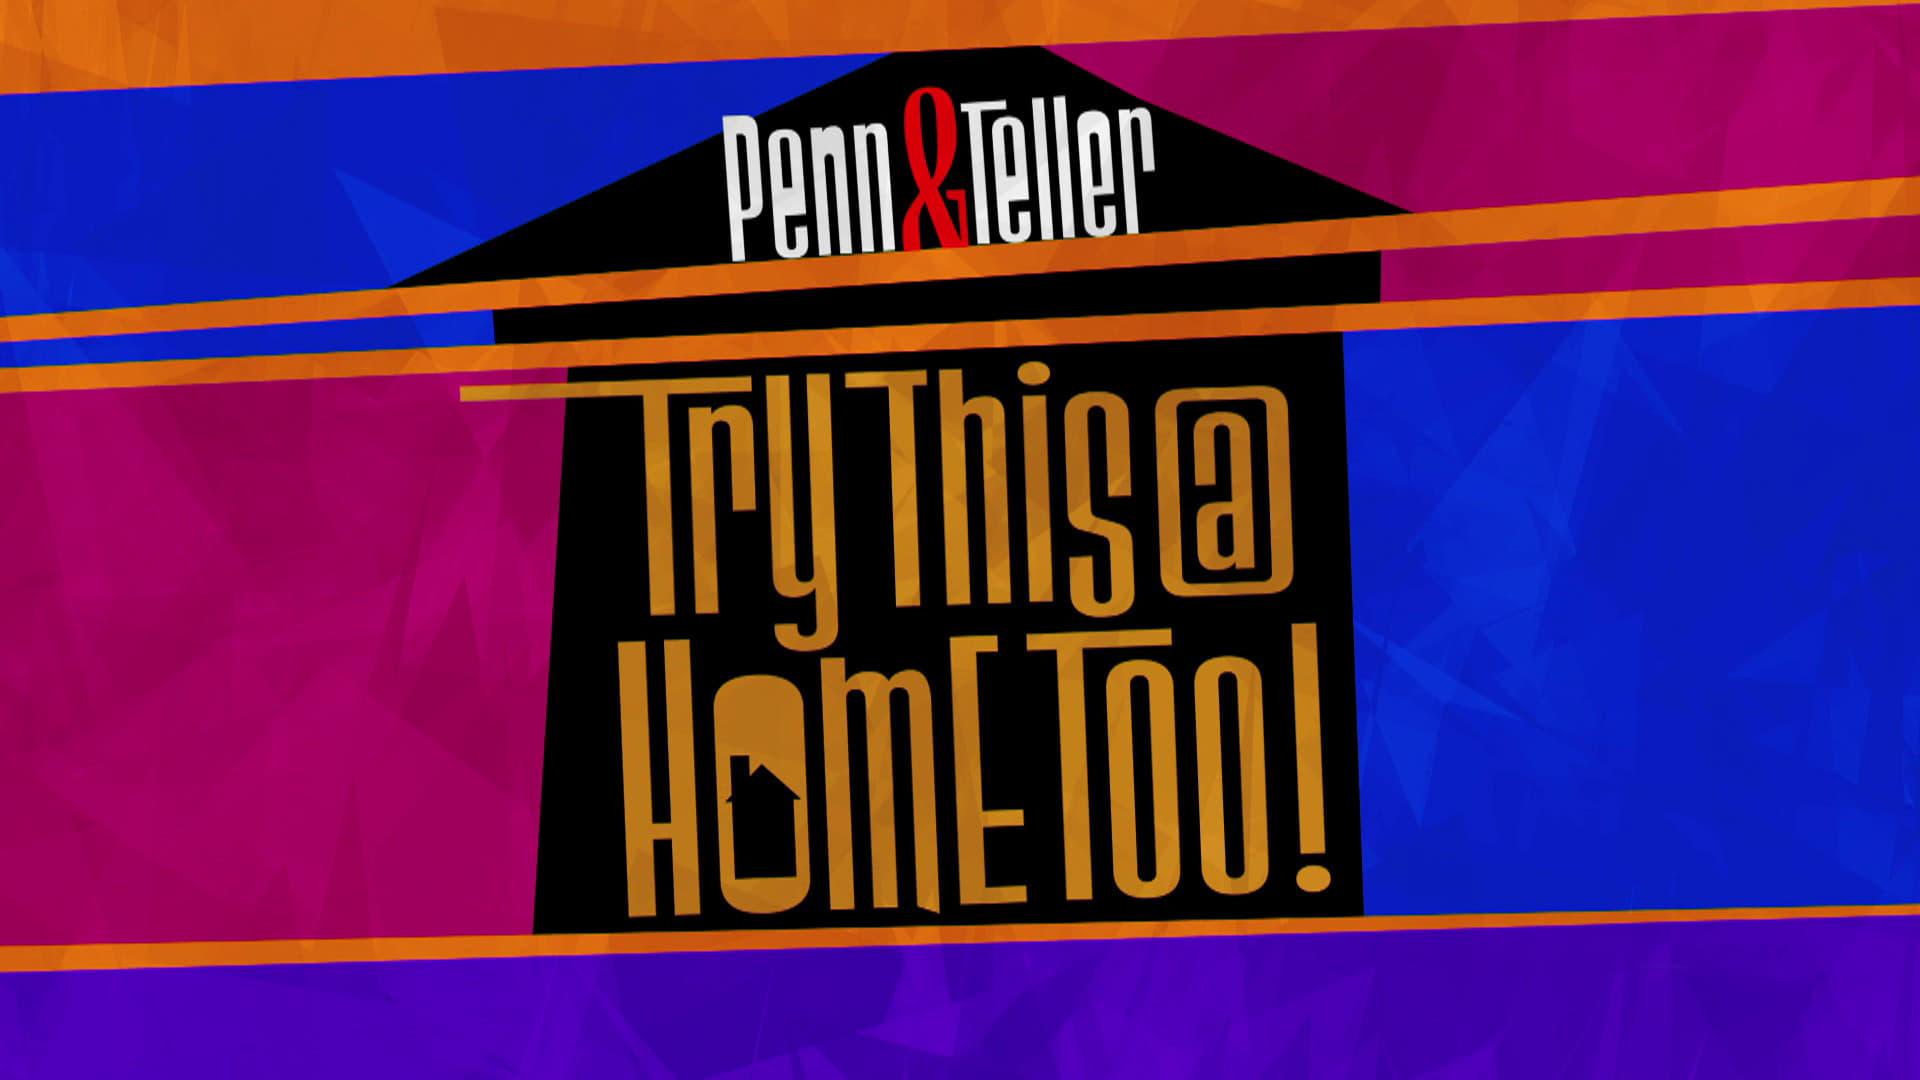 Penn & Teller: Try This at Home Too backdrop